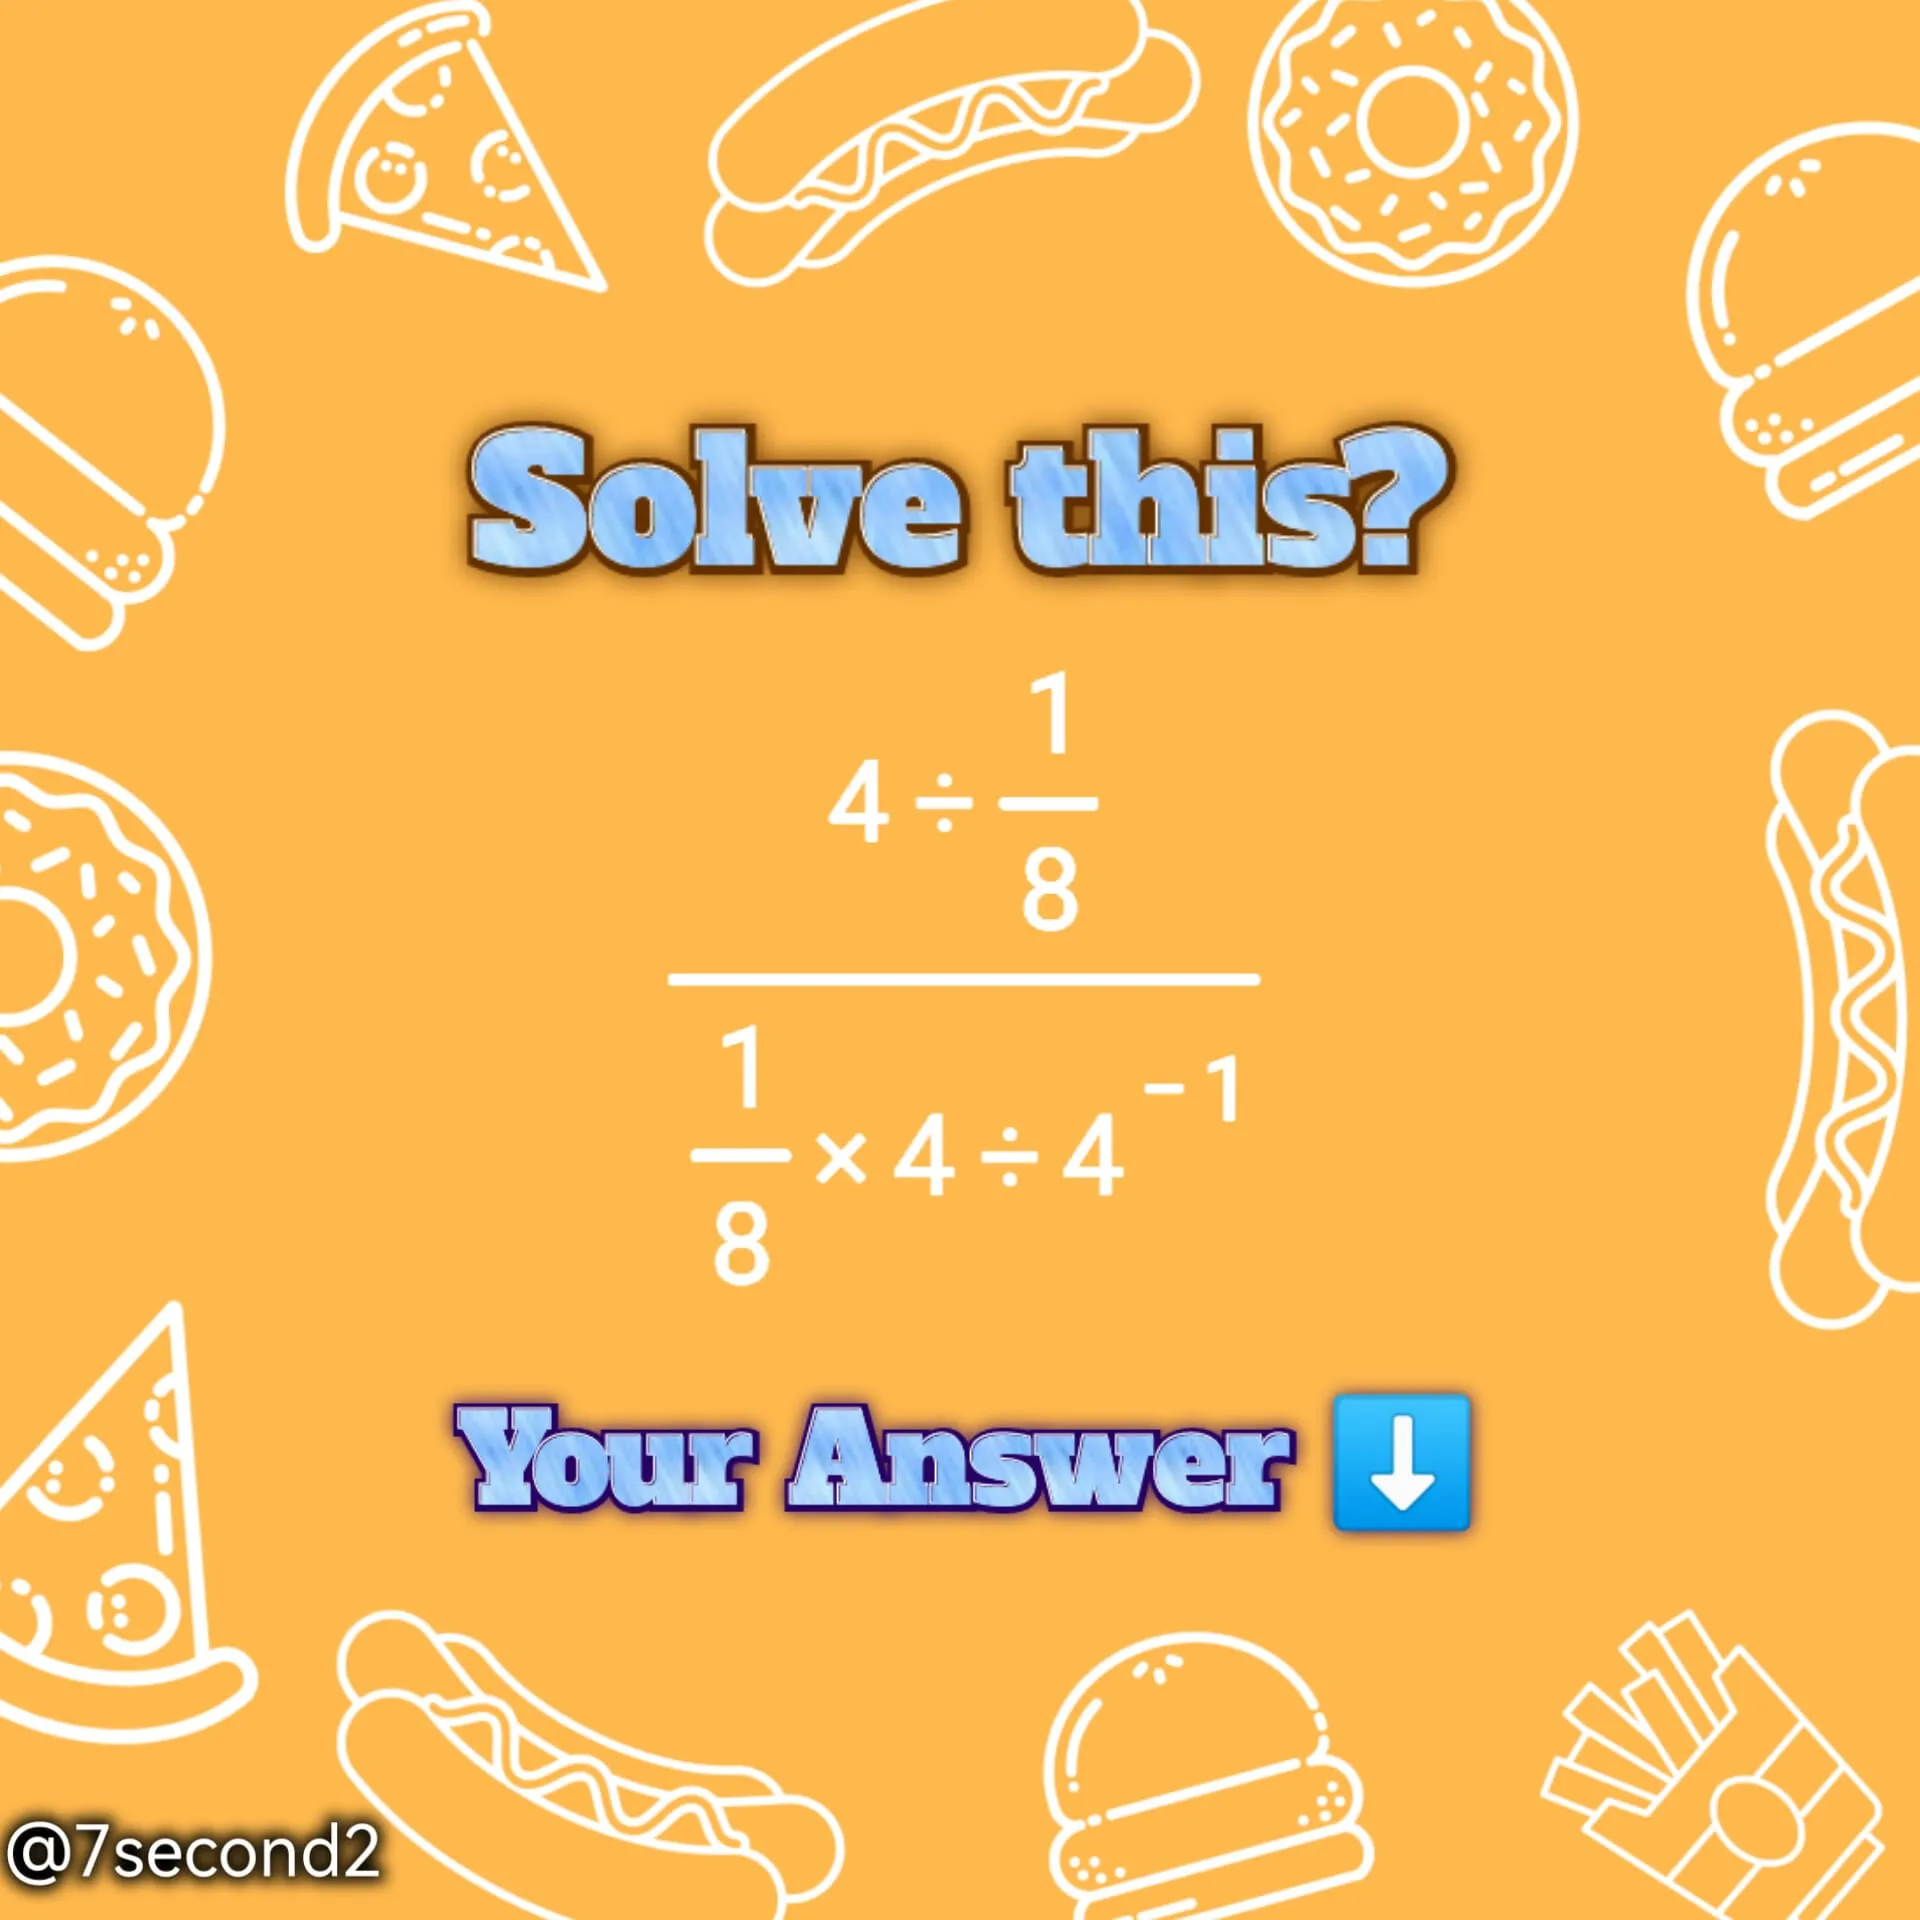 Solve this ❓🤔's images